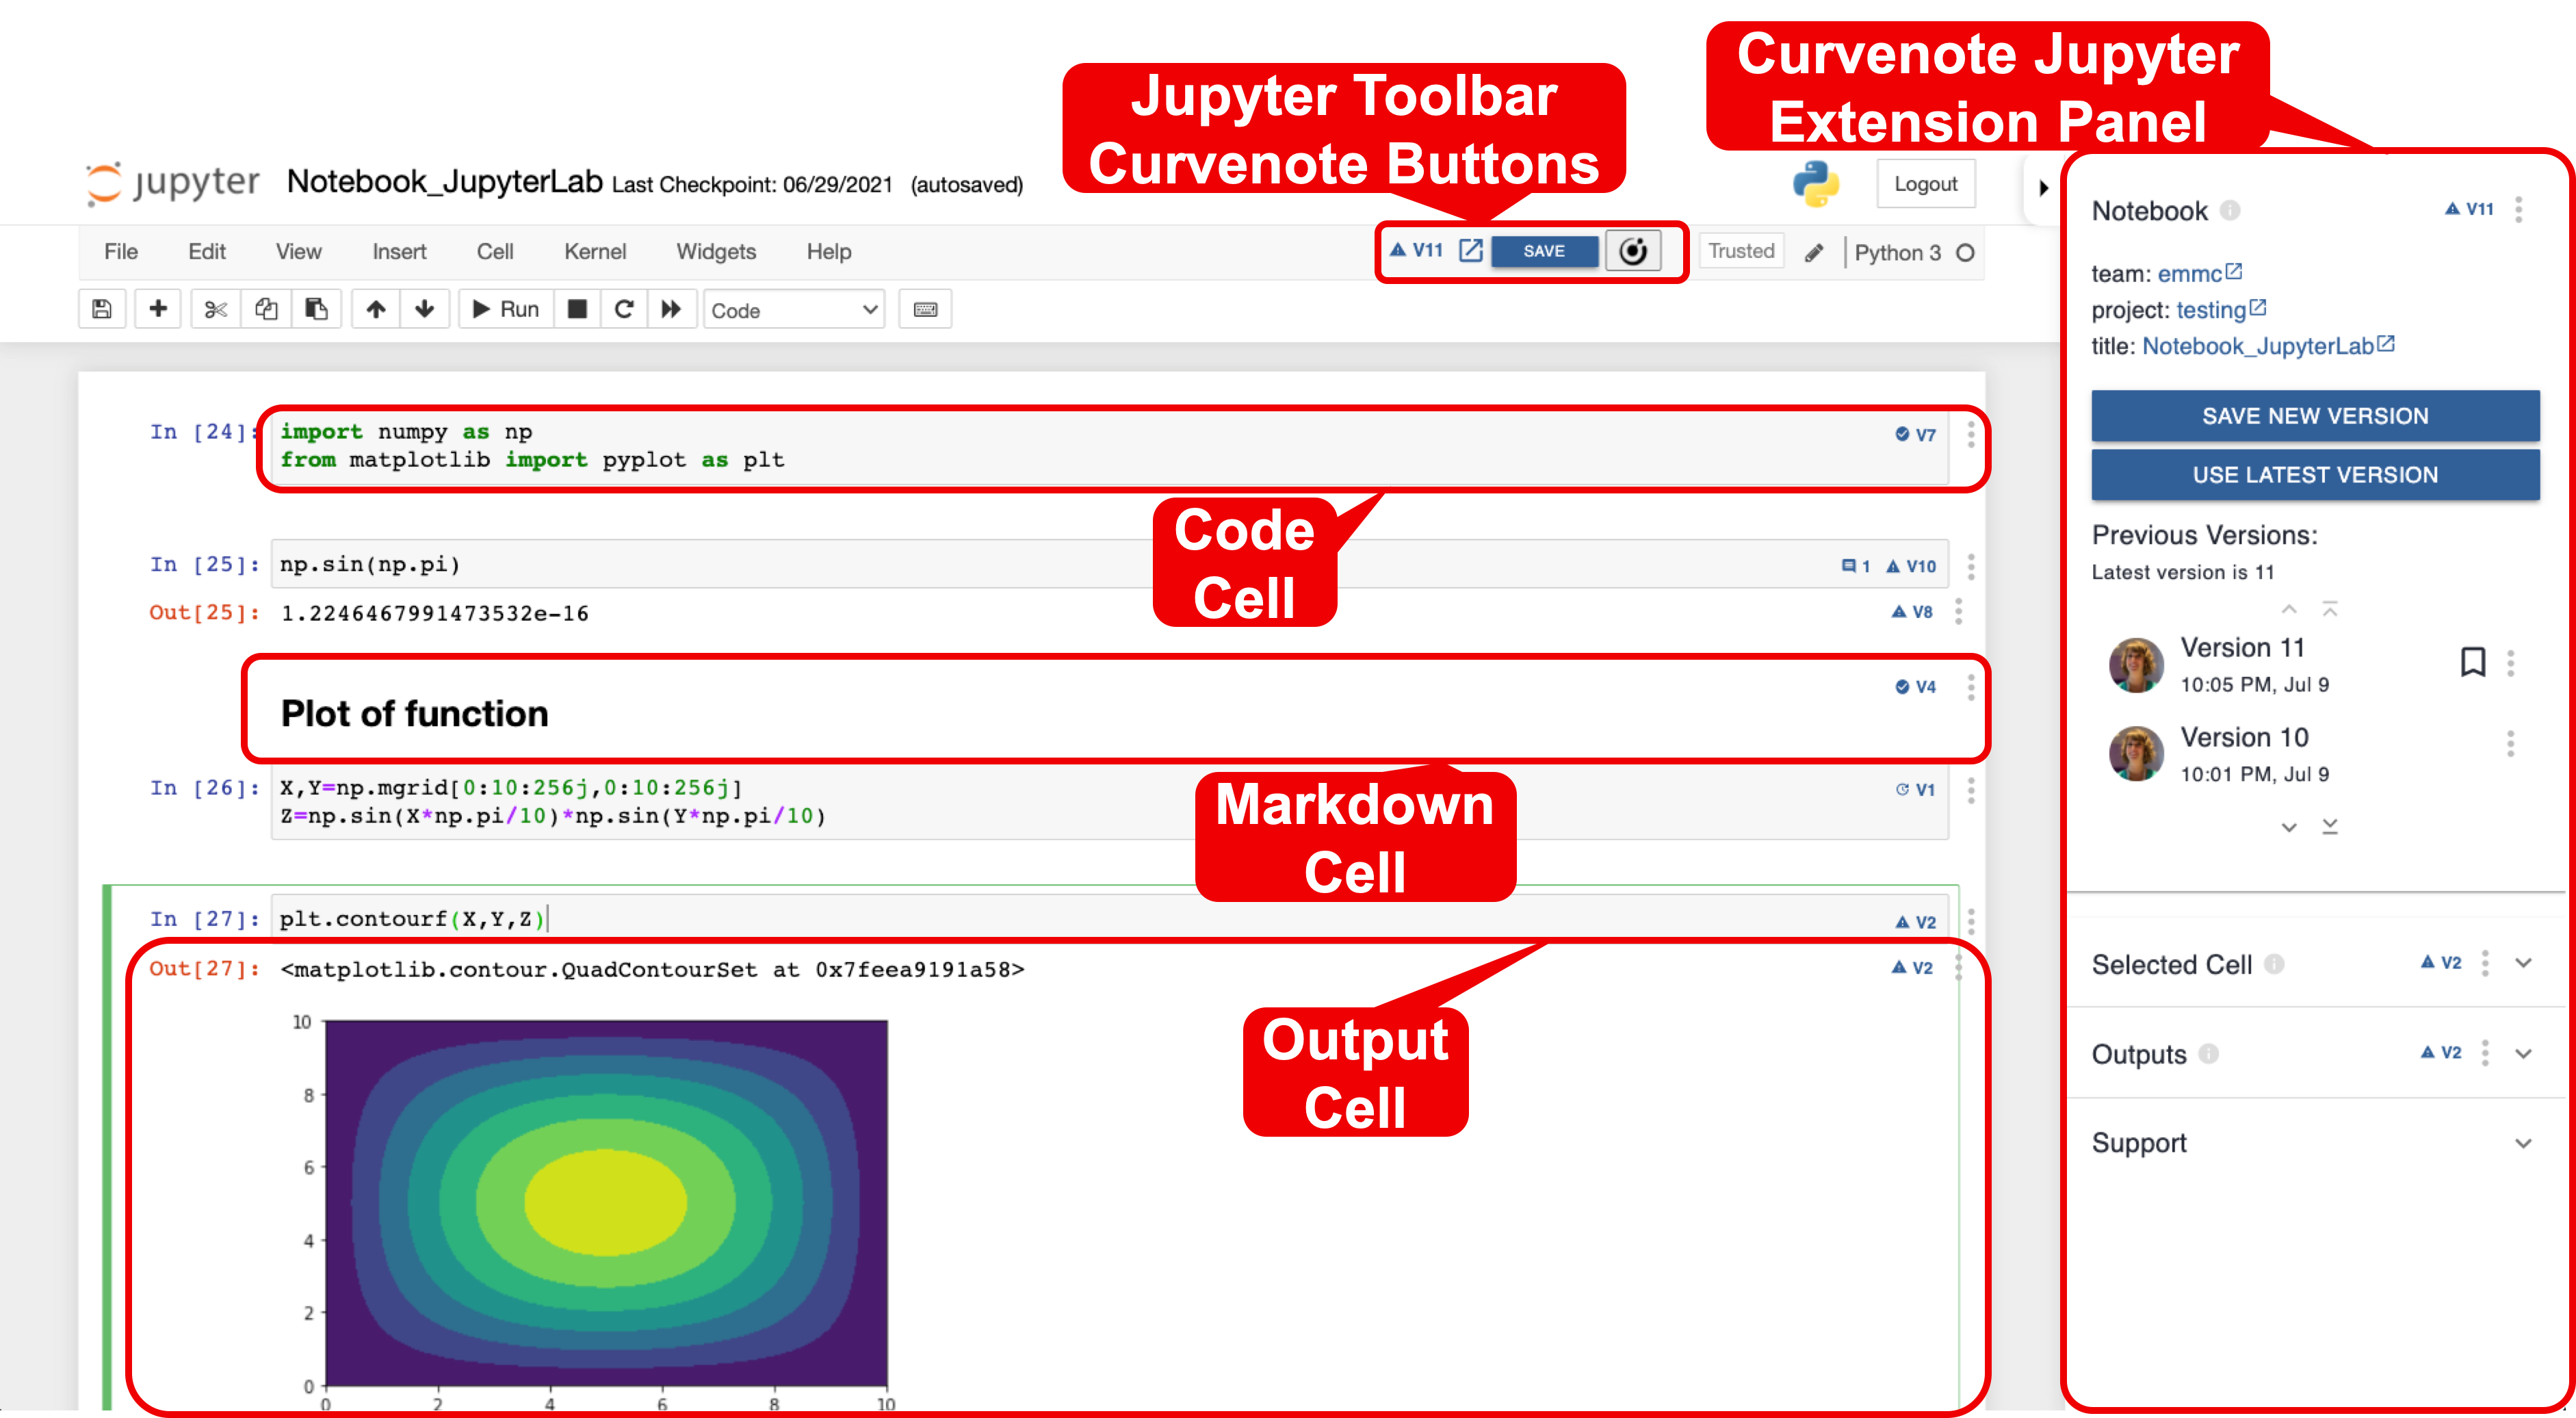 Using the Curvenote Extension in the classic Jupyter Notebook.